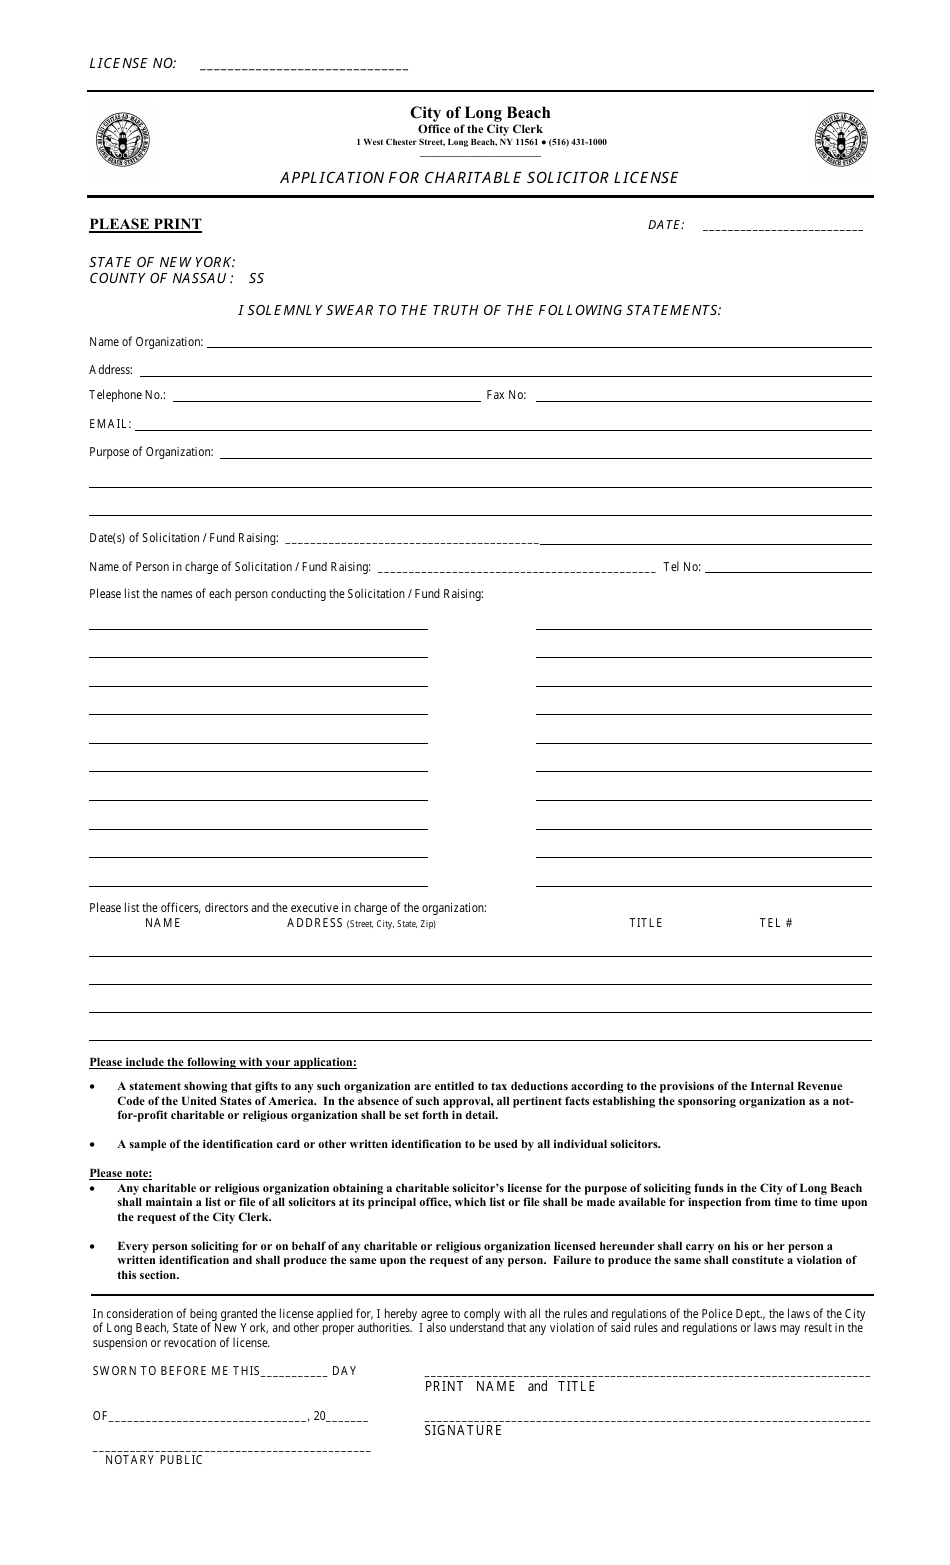 Application for Charitable Solicitor License - City of Long Beach, New York, Page 1